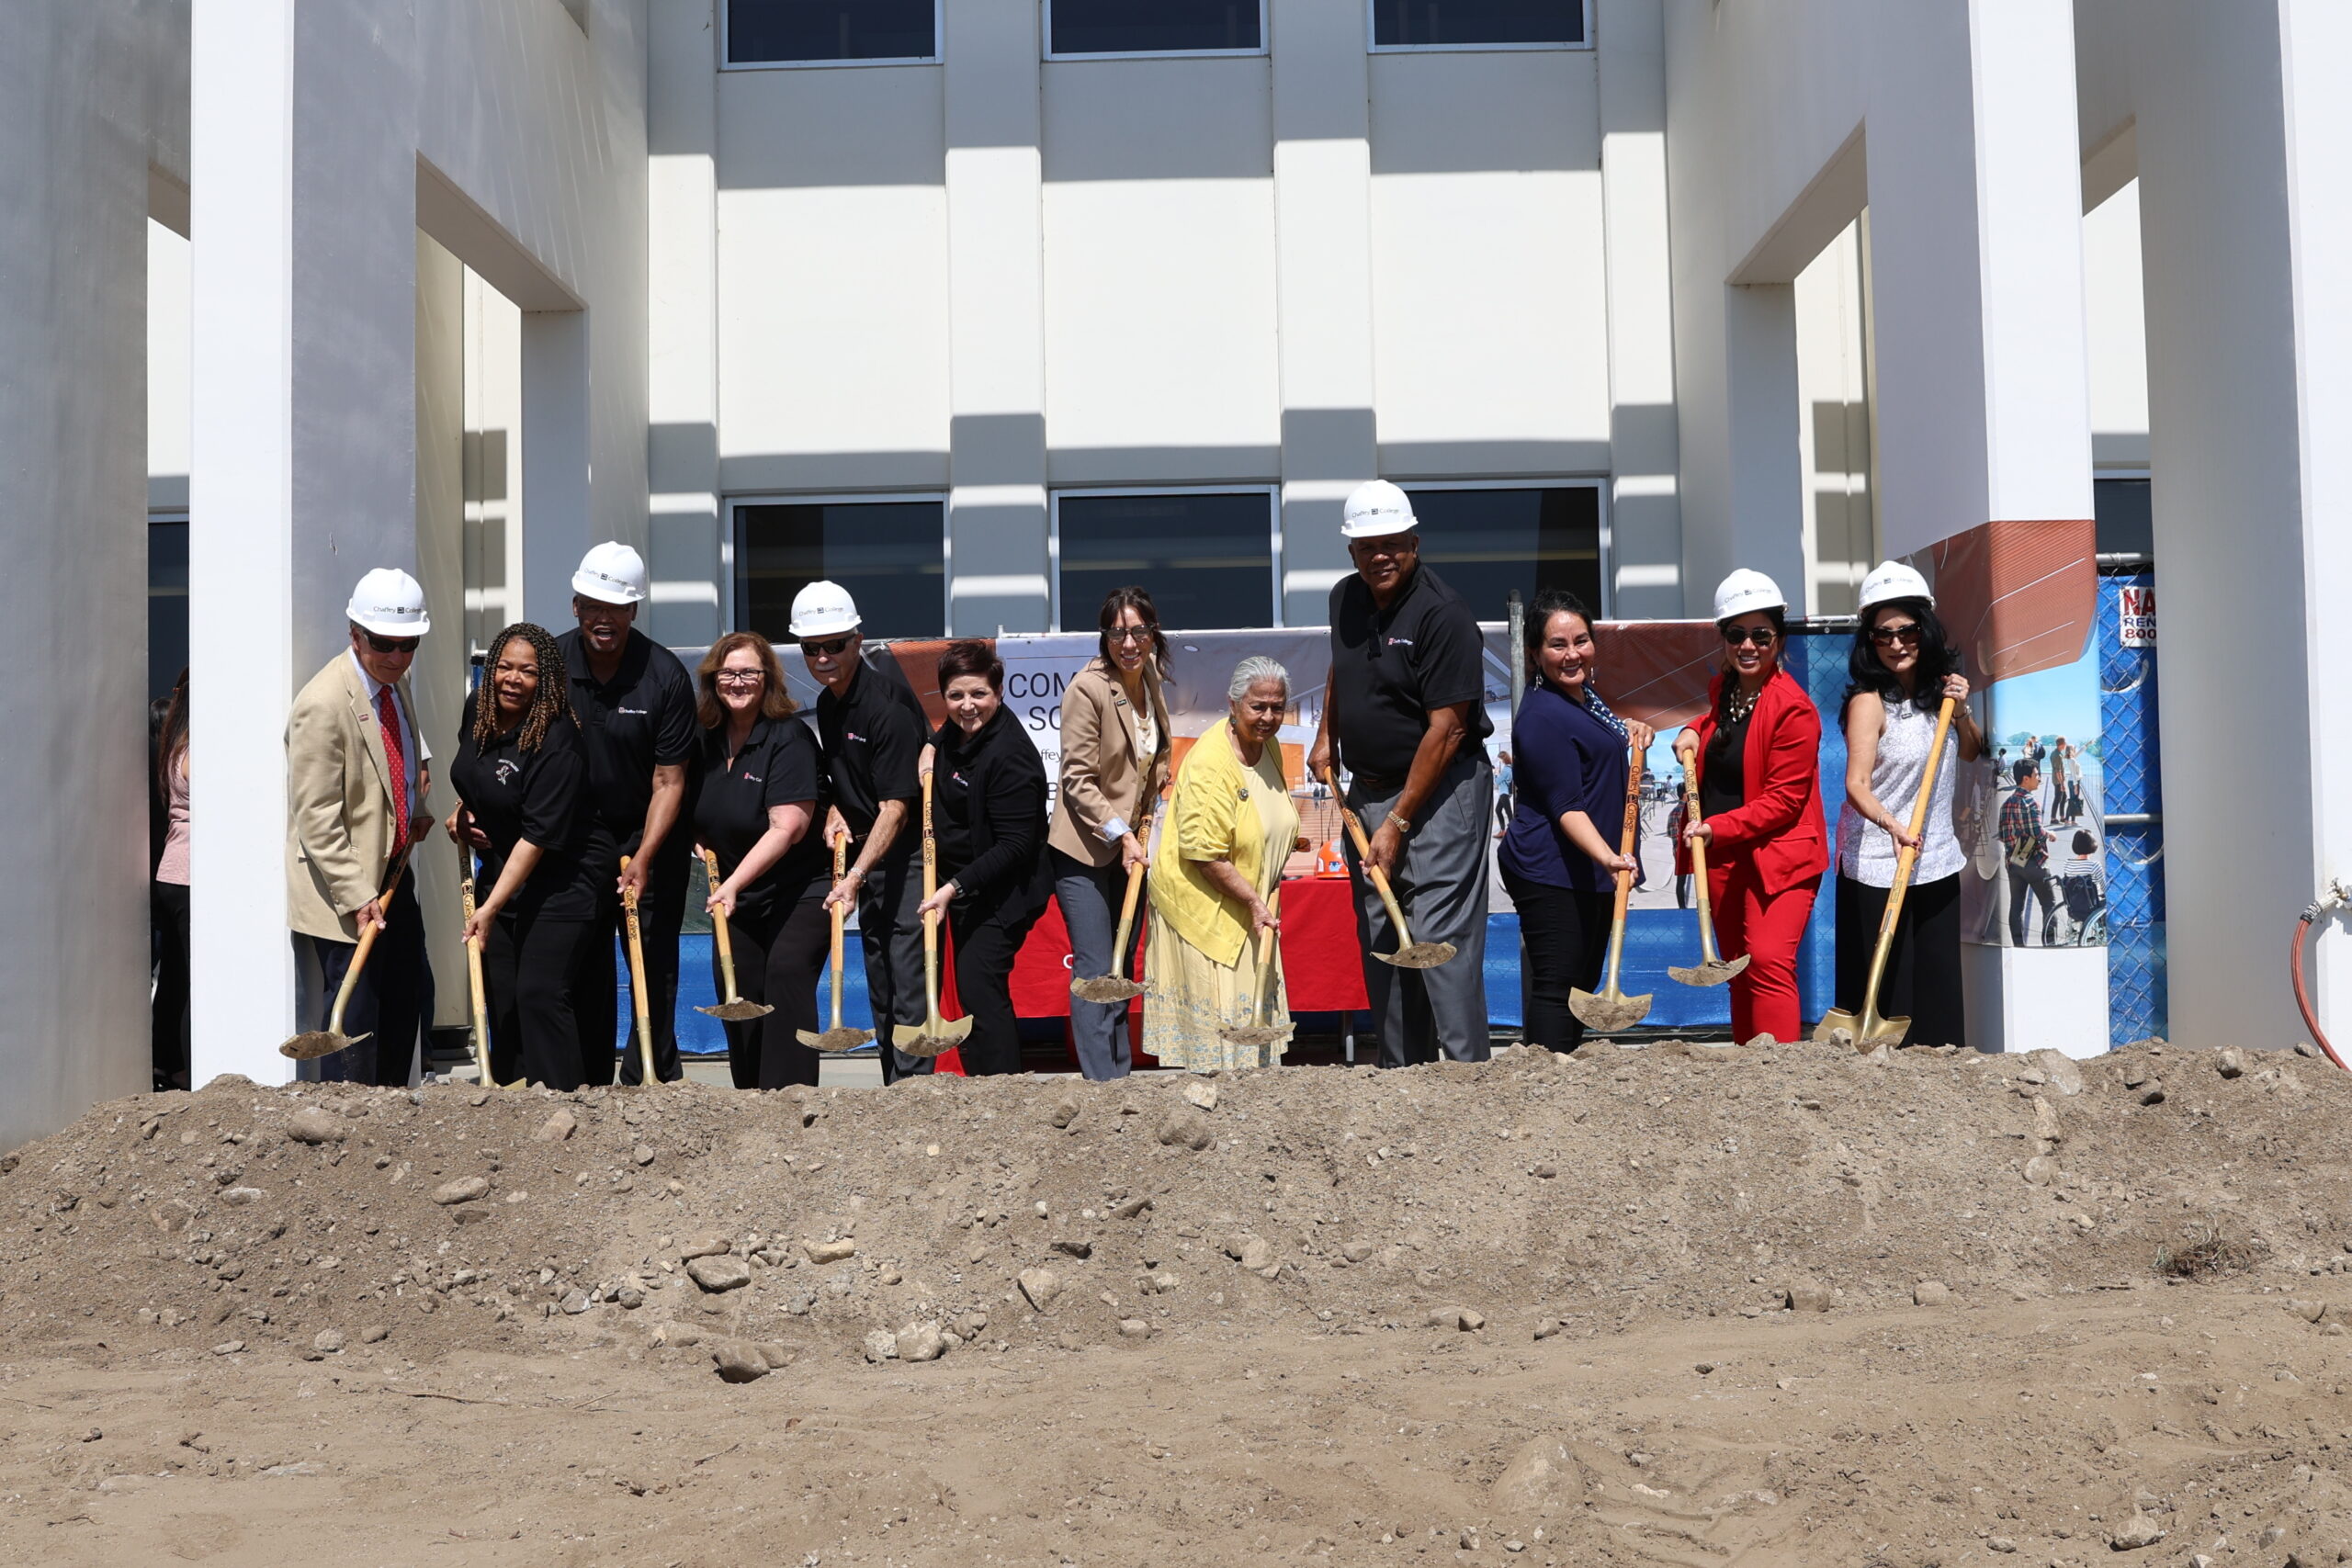 Members of the Chaffey College Governing Board, as well as other campus leaders, gather to break ground on the $75 million Chaffey Library Learning Commons